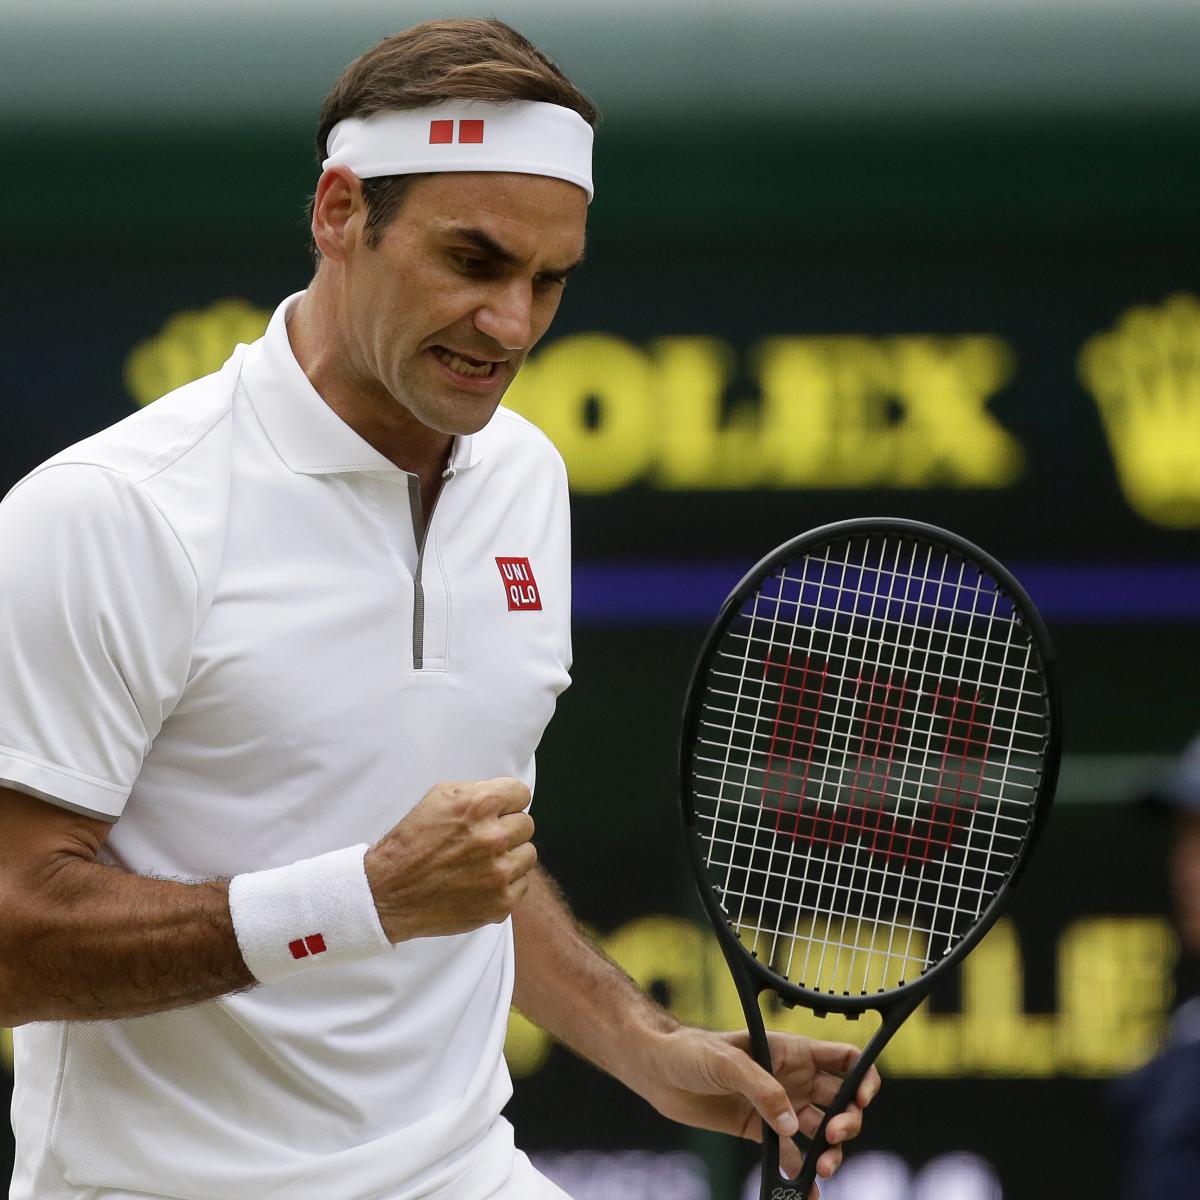 Wimbledon 2019 Results Winners, Scores, Stats from Saturday's Singles